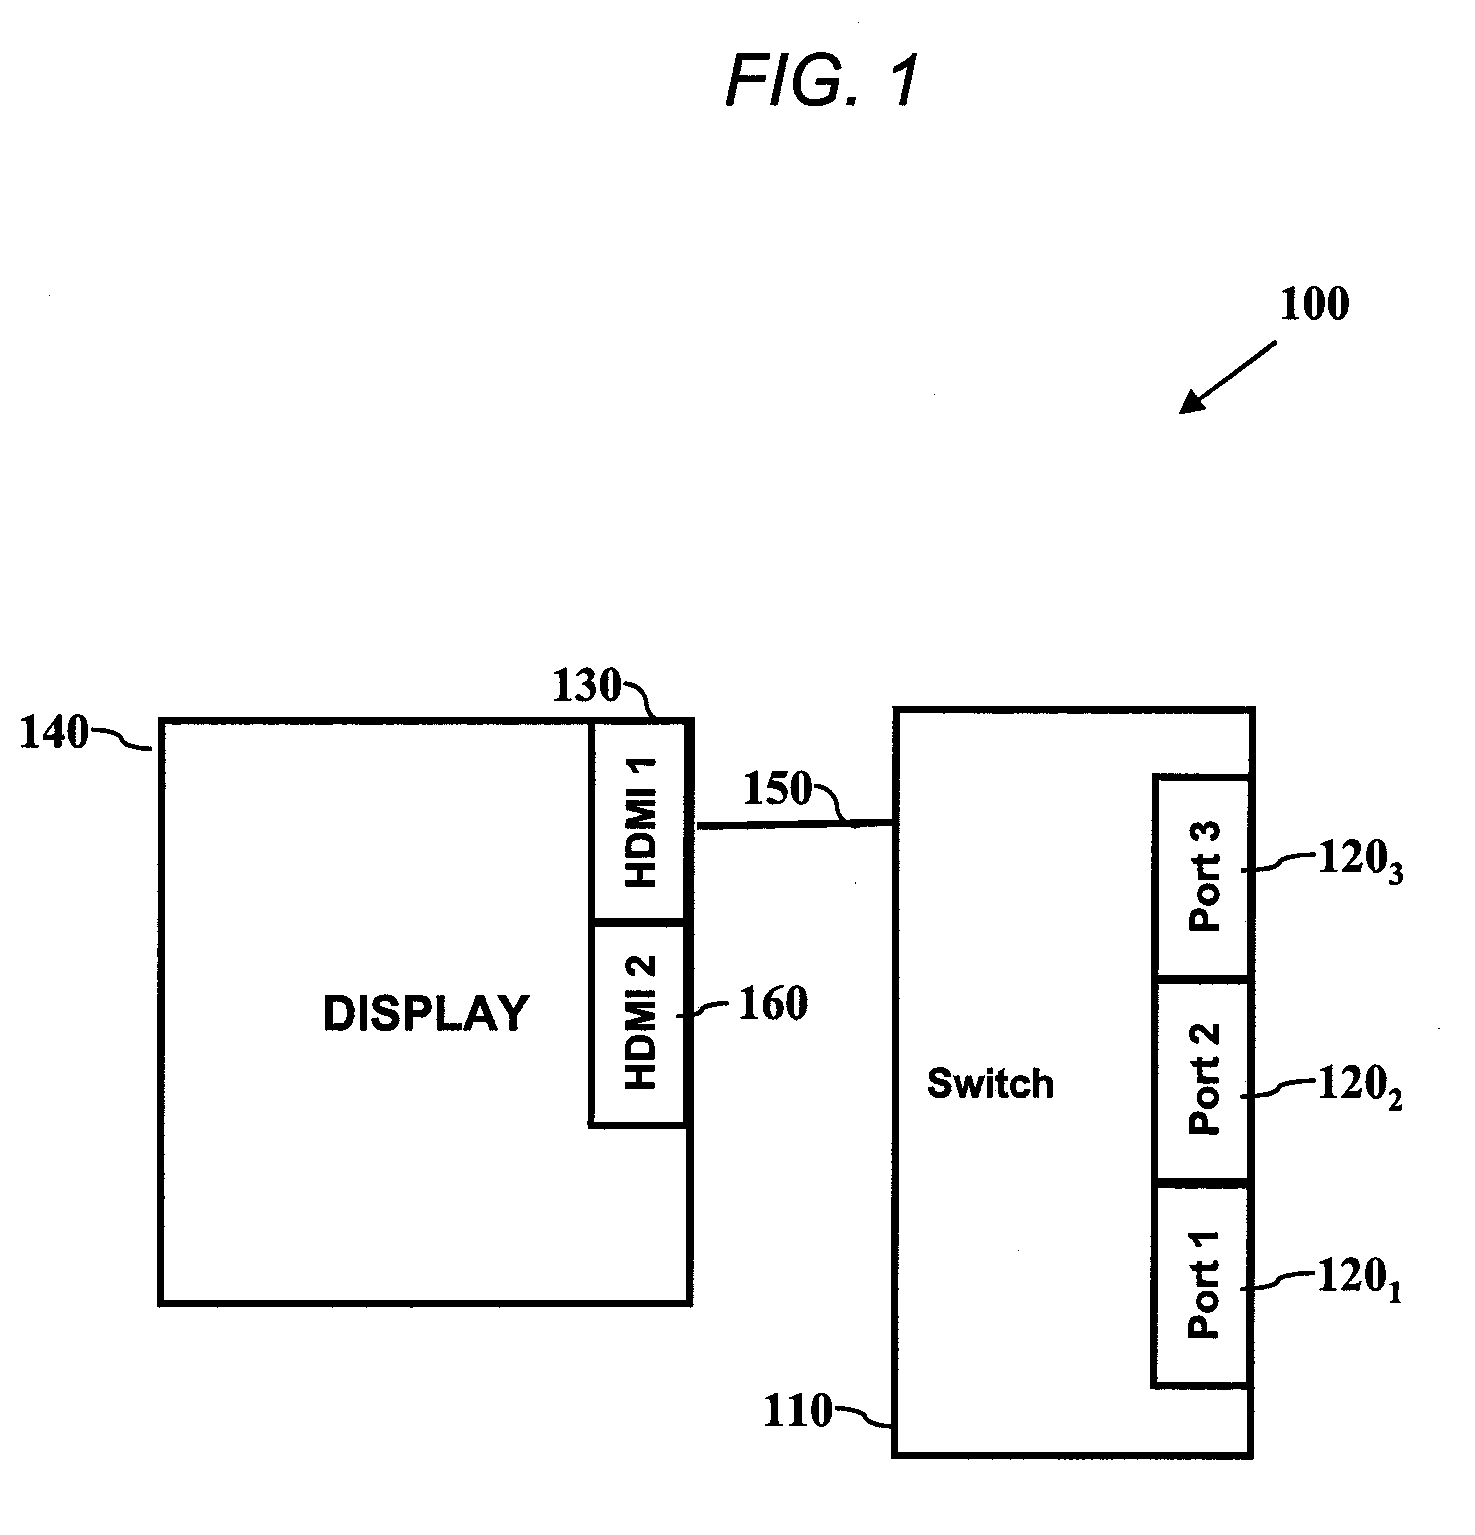 Method and Apparatus for Simulating Consumer Electronic Control Functionality for Devices